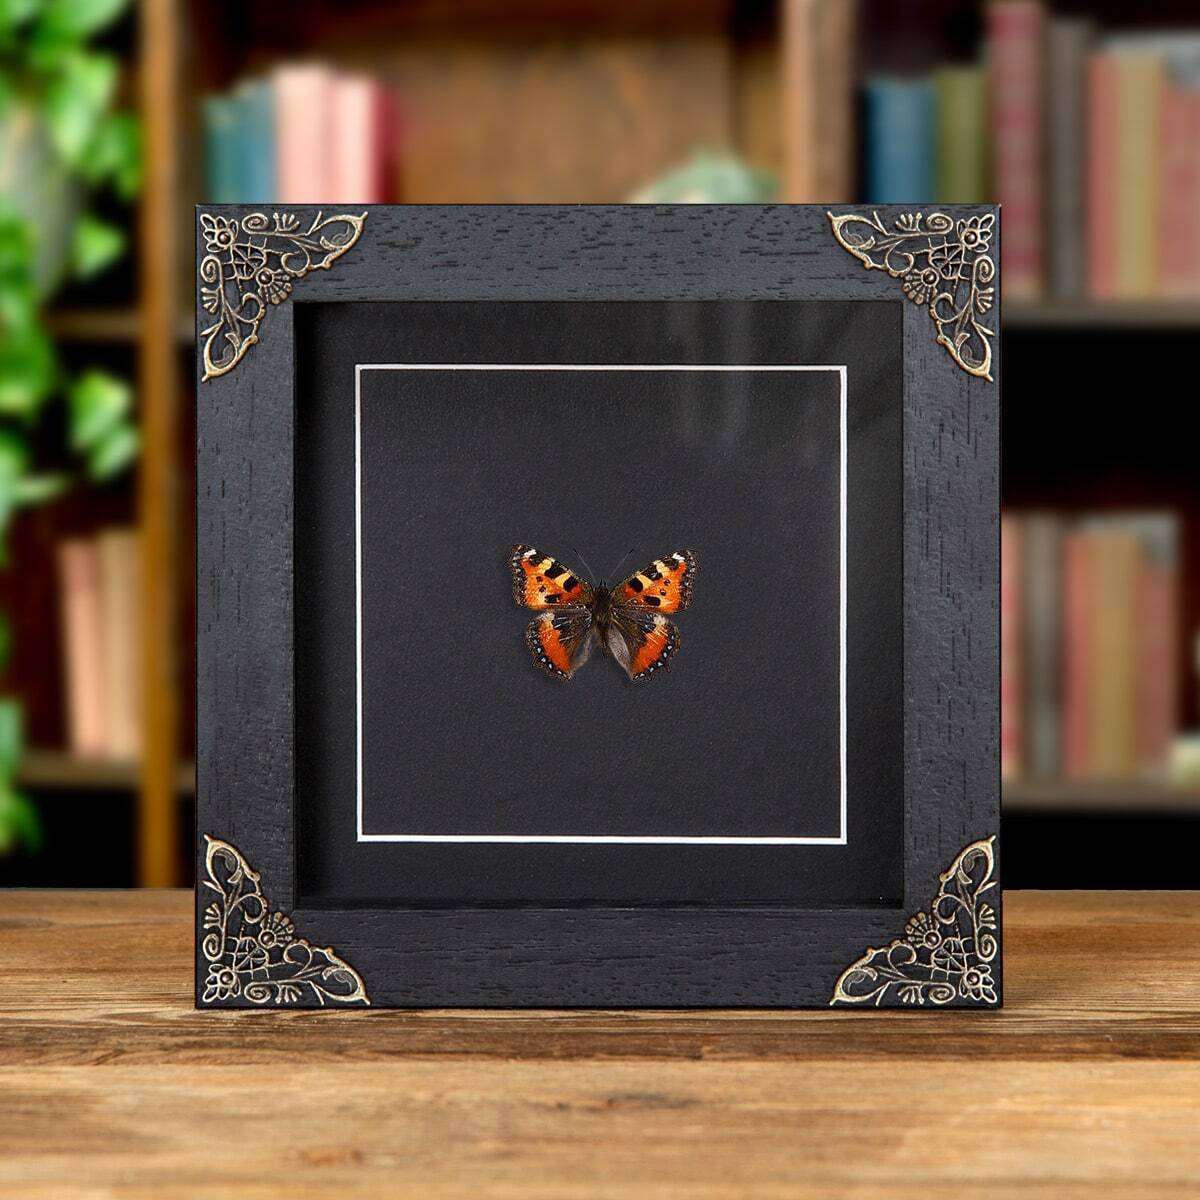 The Small Tortoiseshell Taxidermy Butterfly in Baroque Style Frame (Aglais urtic